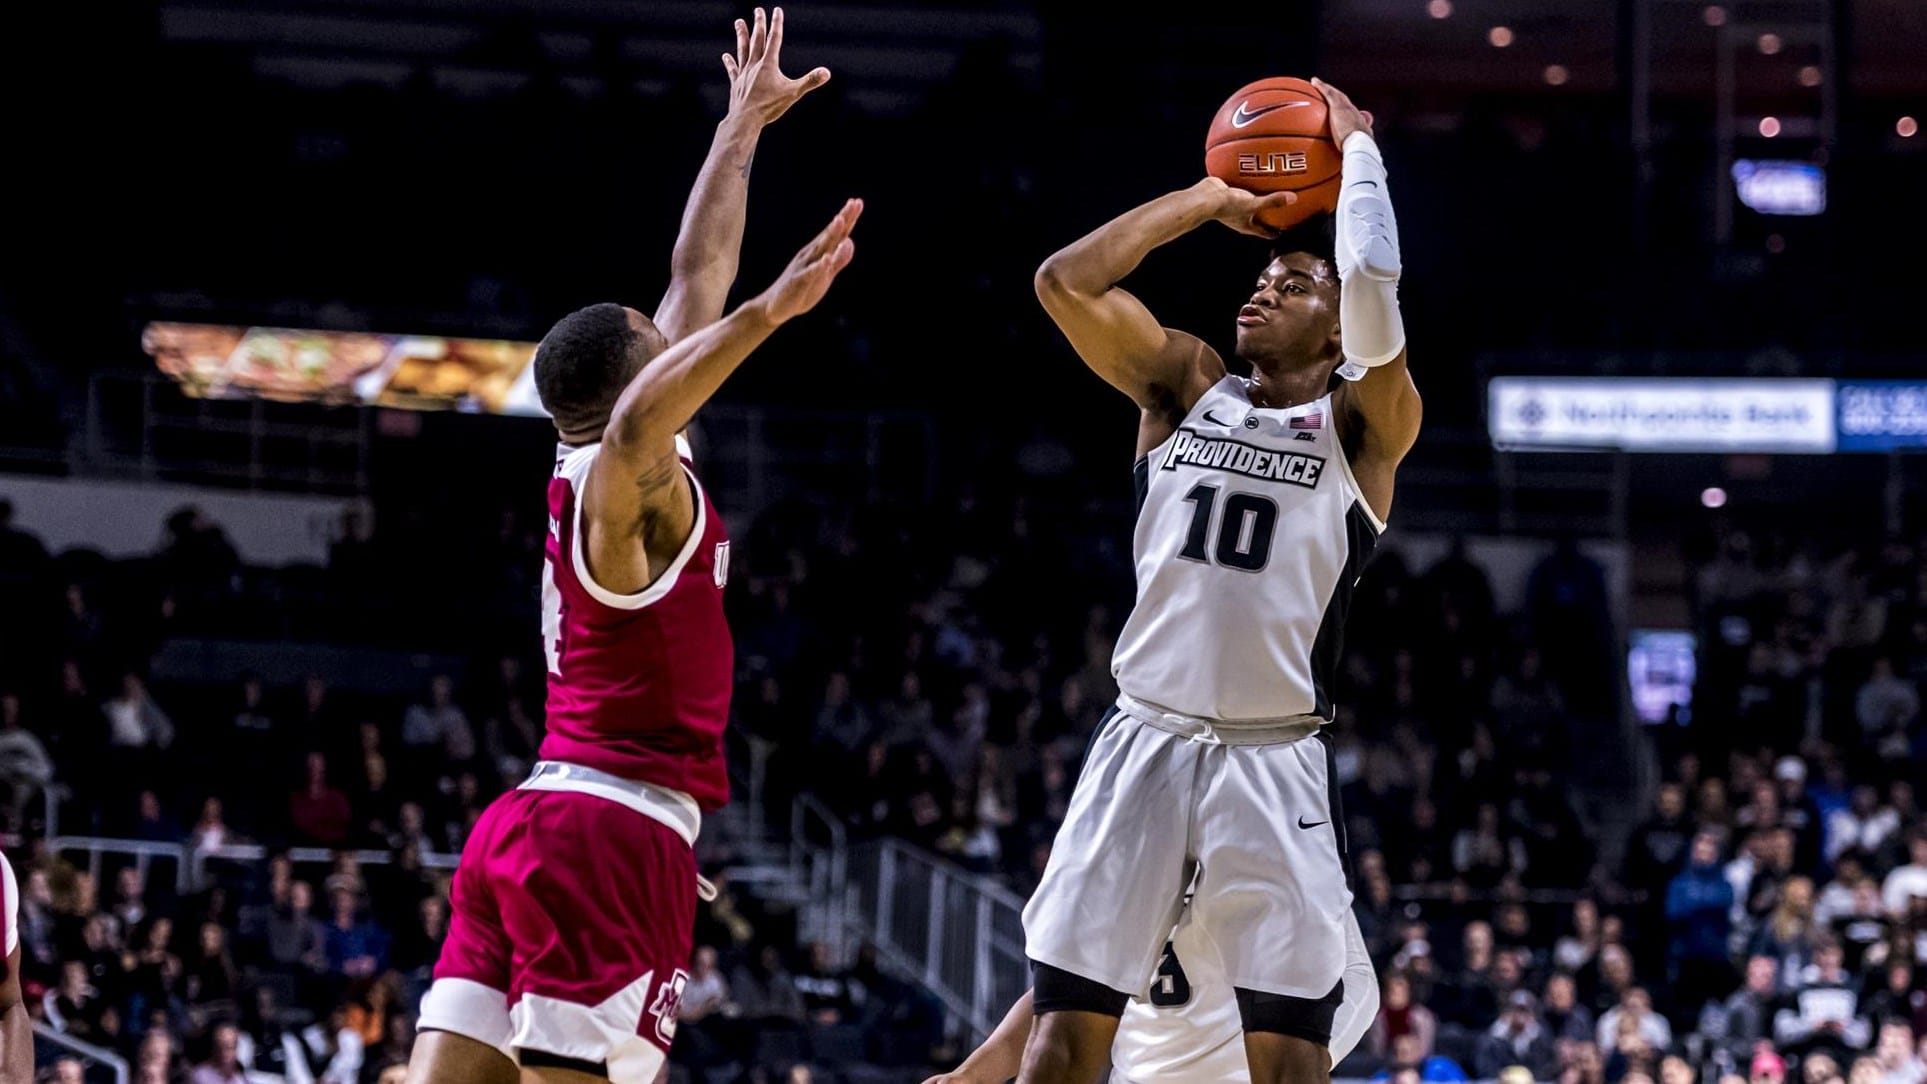 St. John's Red Storm at Providence Friars